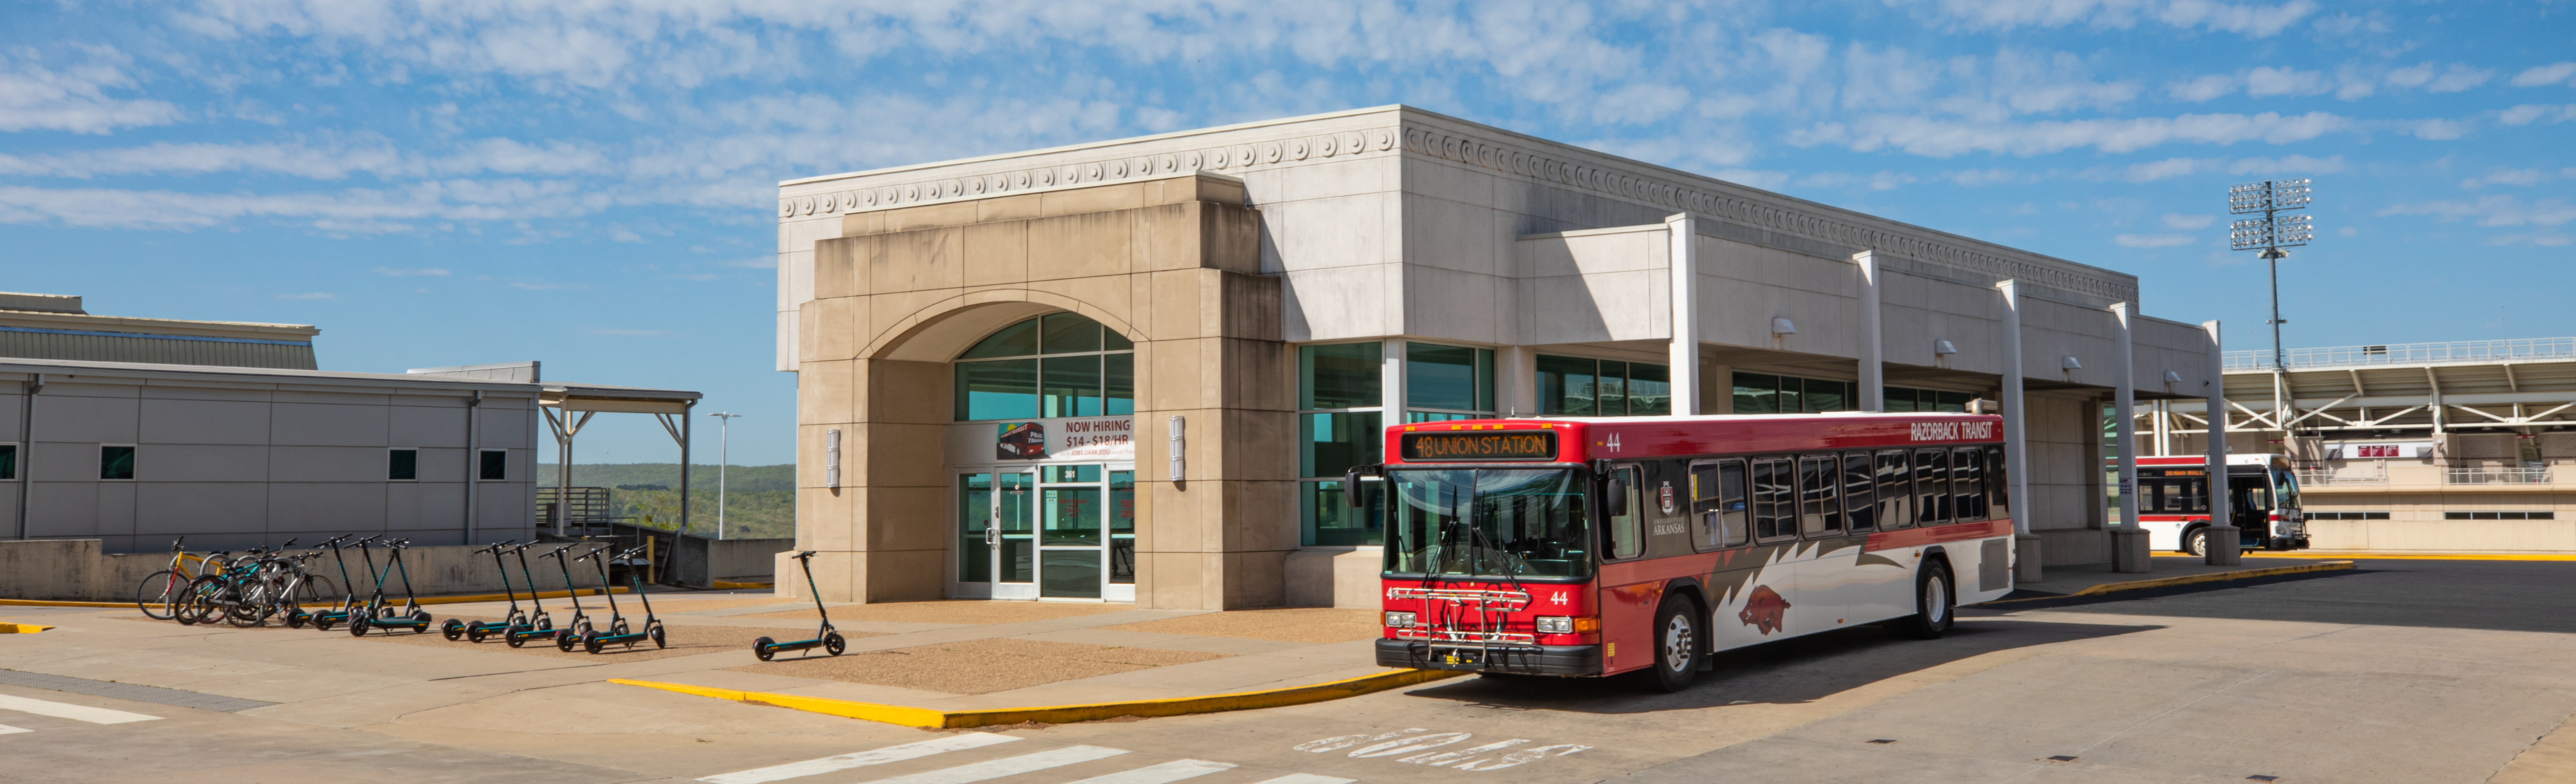 photograph of a bus pulling out of the bus station on Garland Ave